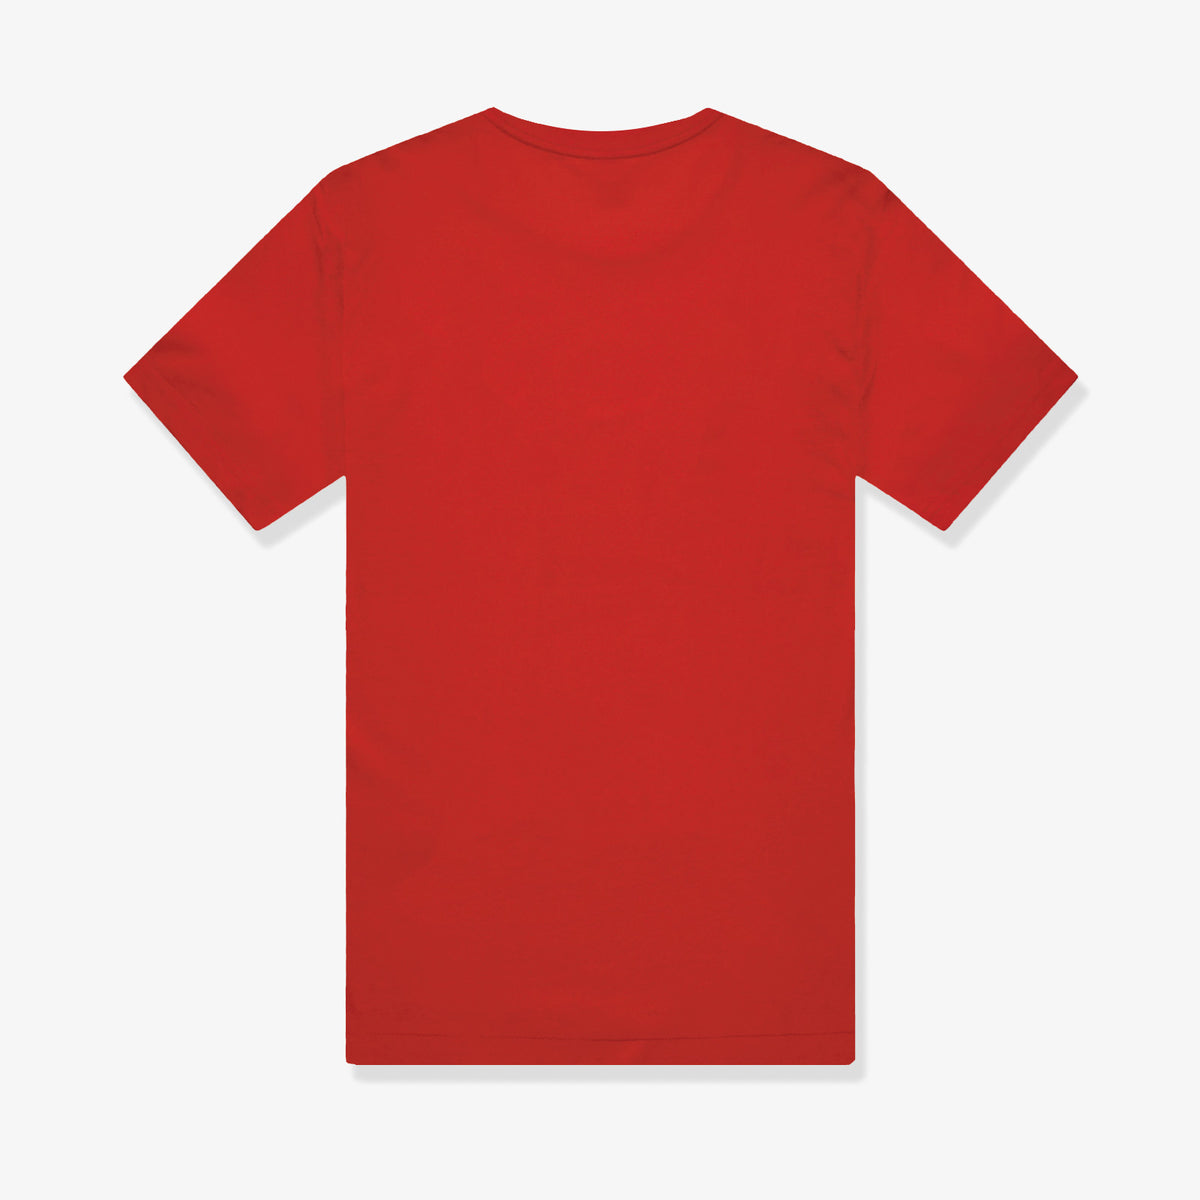 Throwback Icon Tee - Red